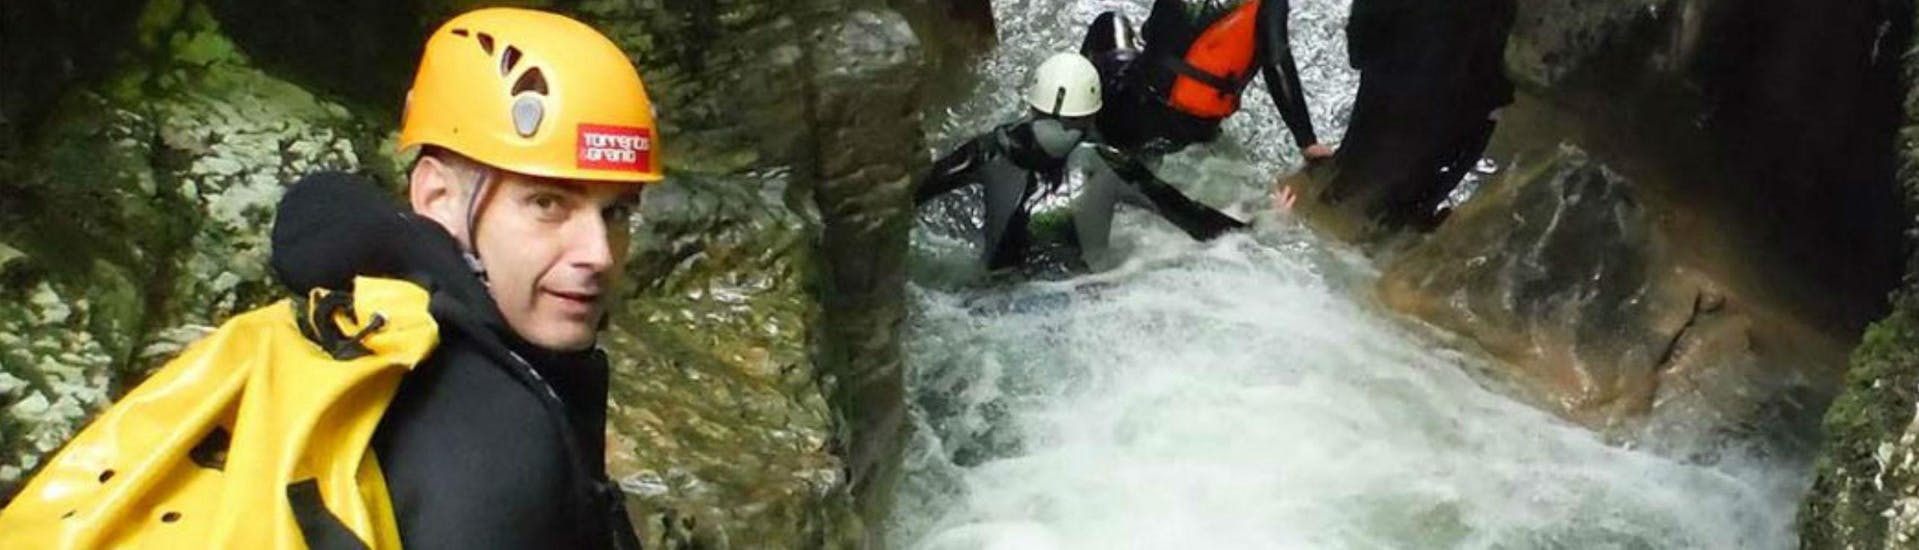 People are taking a natural slide during their Discovery Canyoning in Chassezac Canyon with Torrents & Granit.